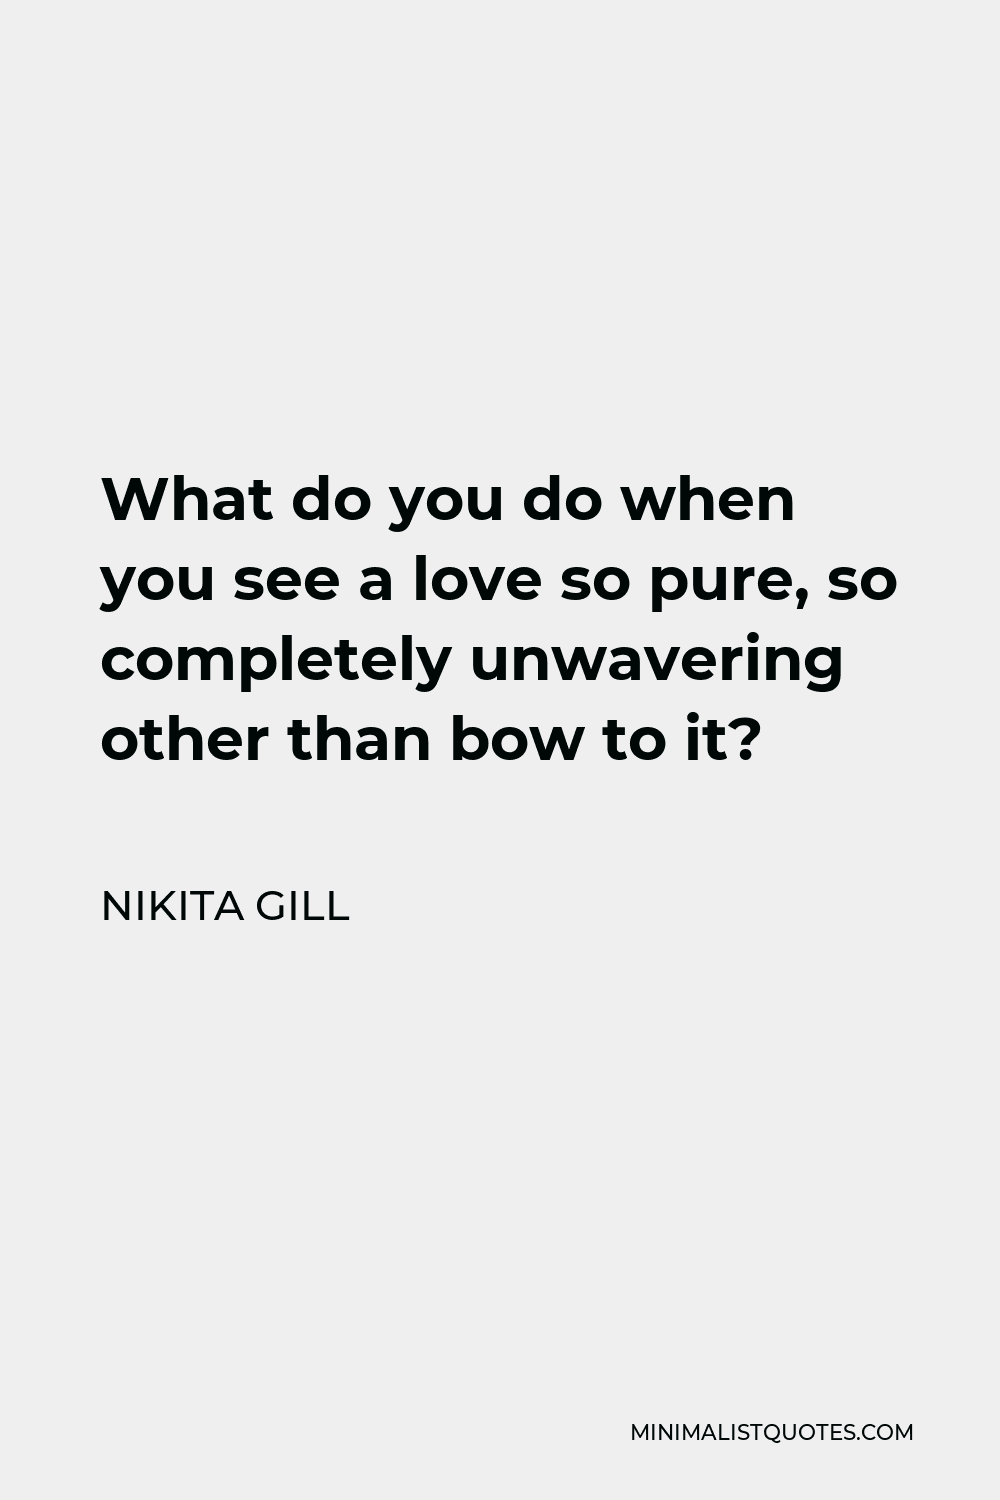 Nikita Gill Quote - What do you do when you see a love so pure, so completely unwavering other than bow to it?